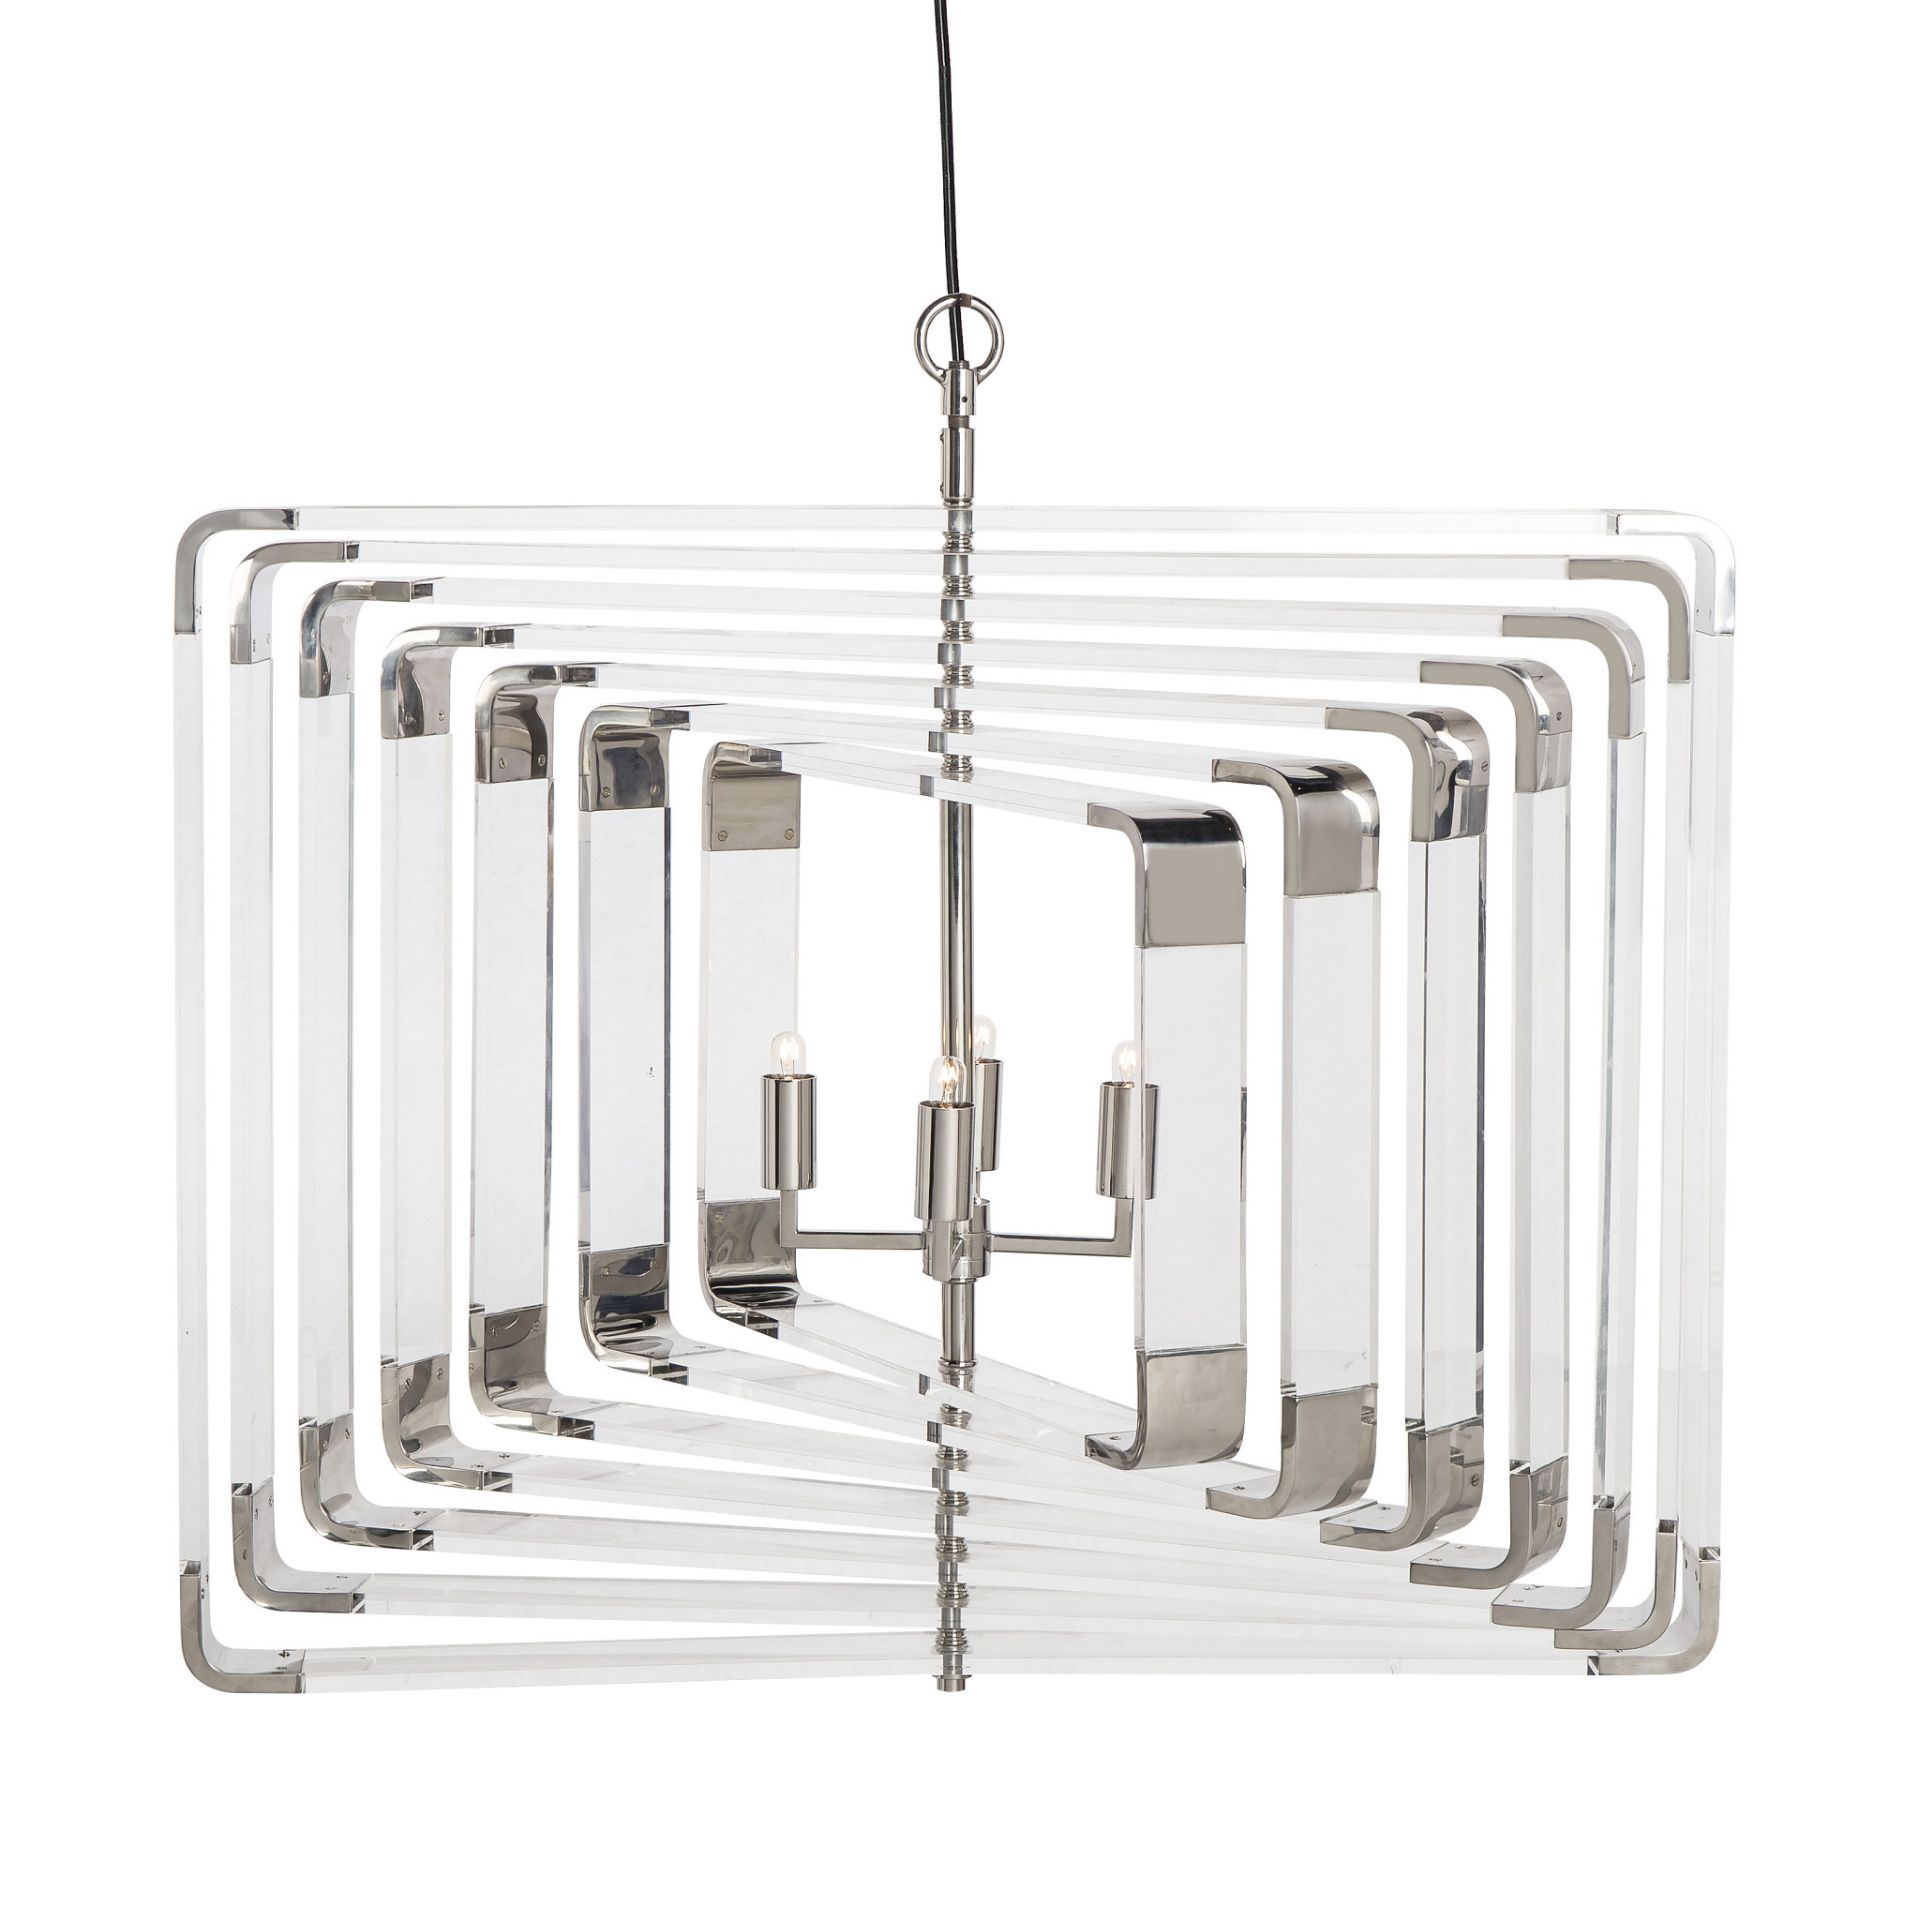 1 x Sonder Living Spiral Acrylic 7-Layer Light With Nickel Finish - New Boxed Stock - Ref: FG1007211 - Image 3 of 6